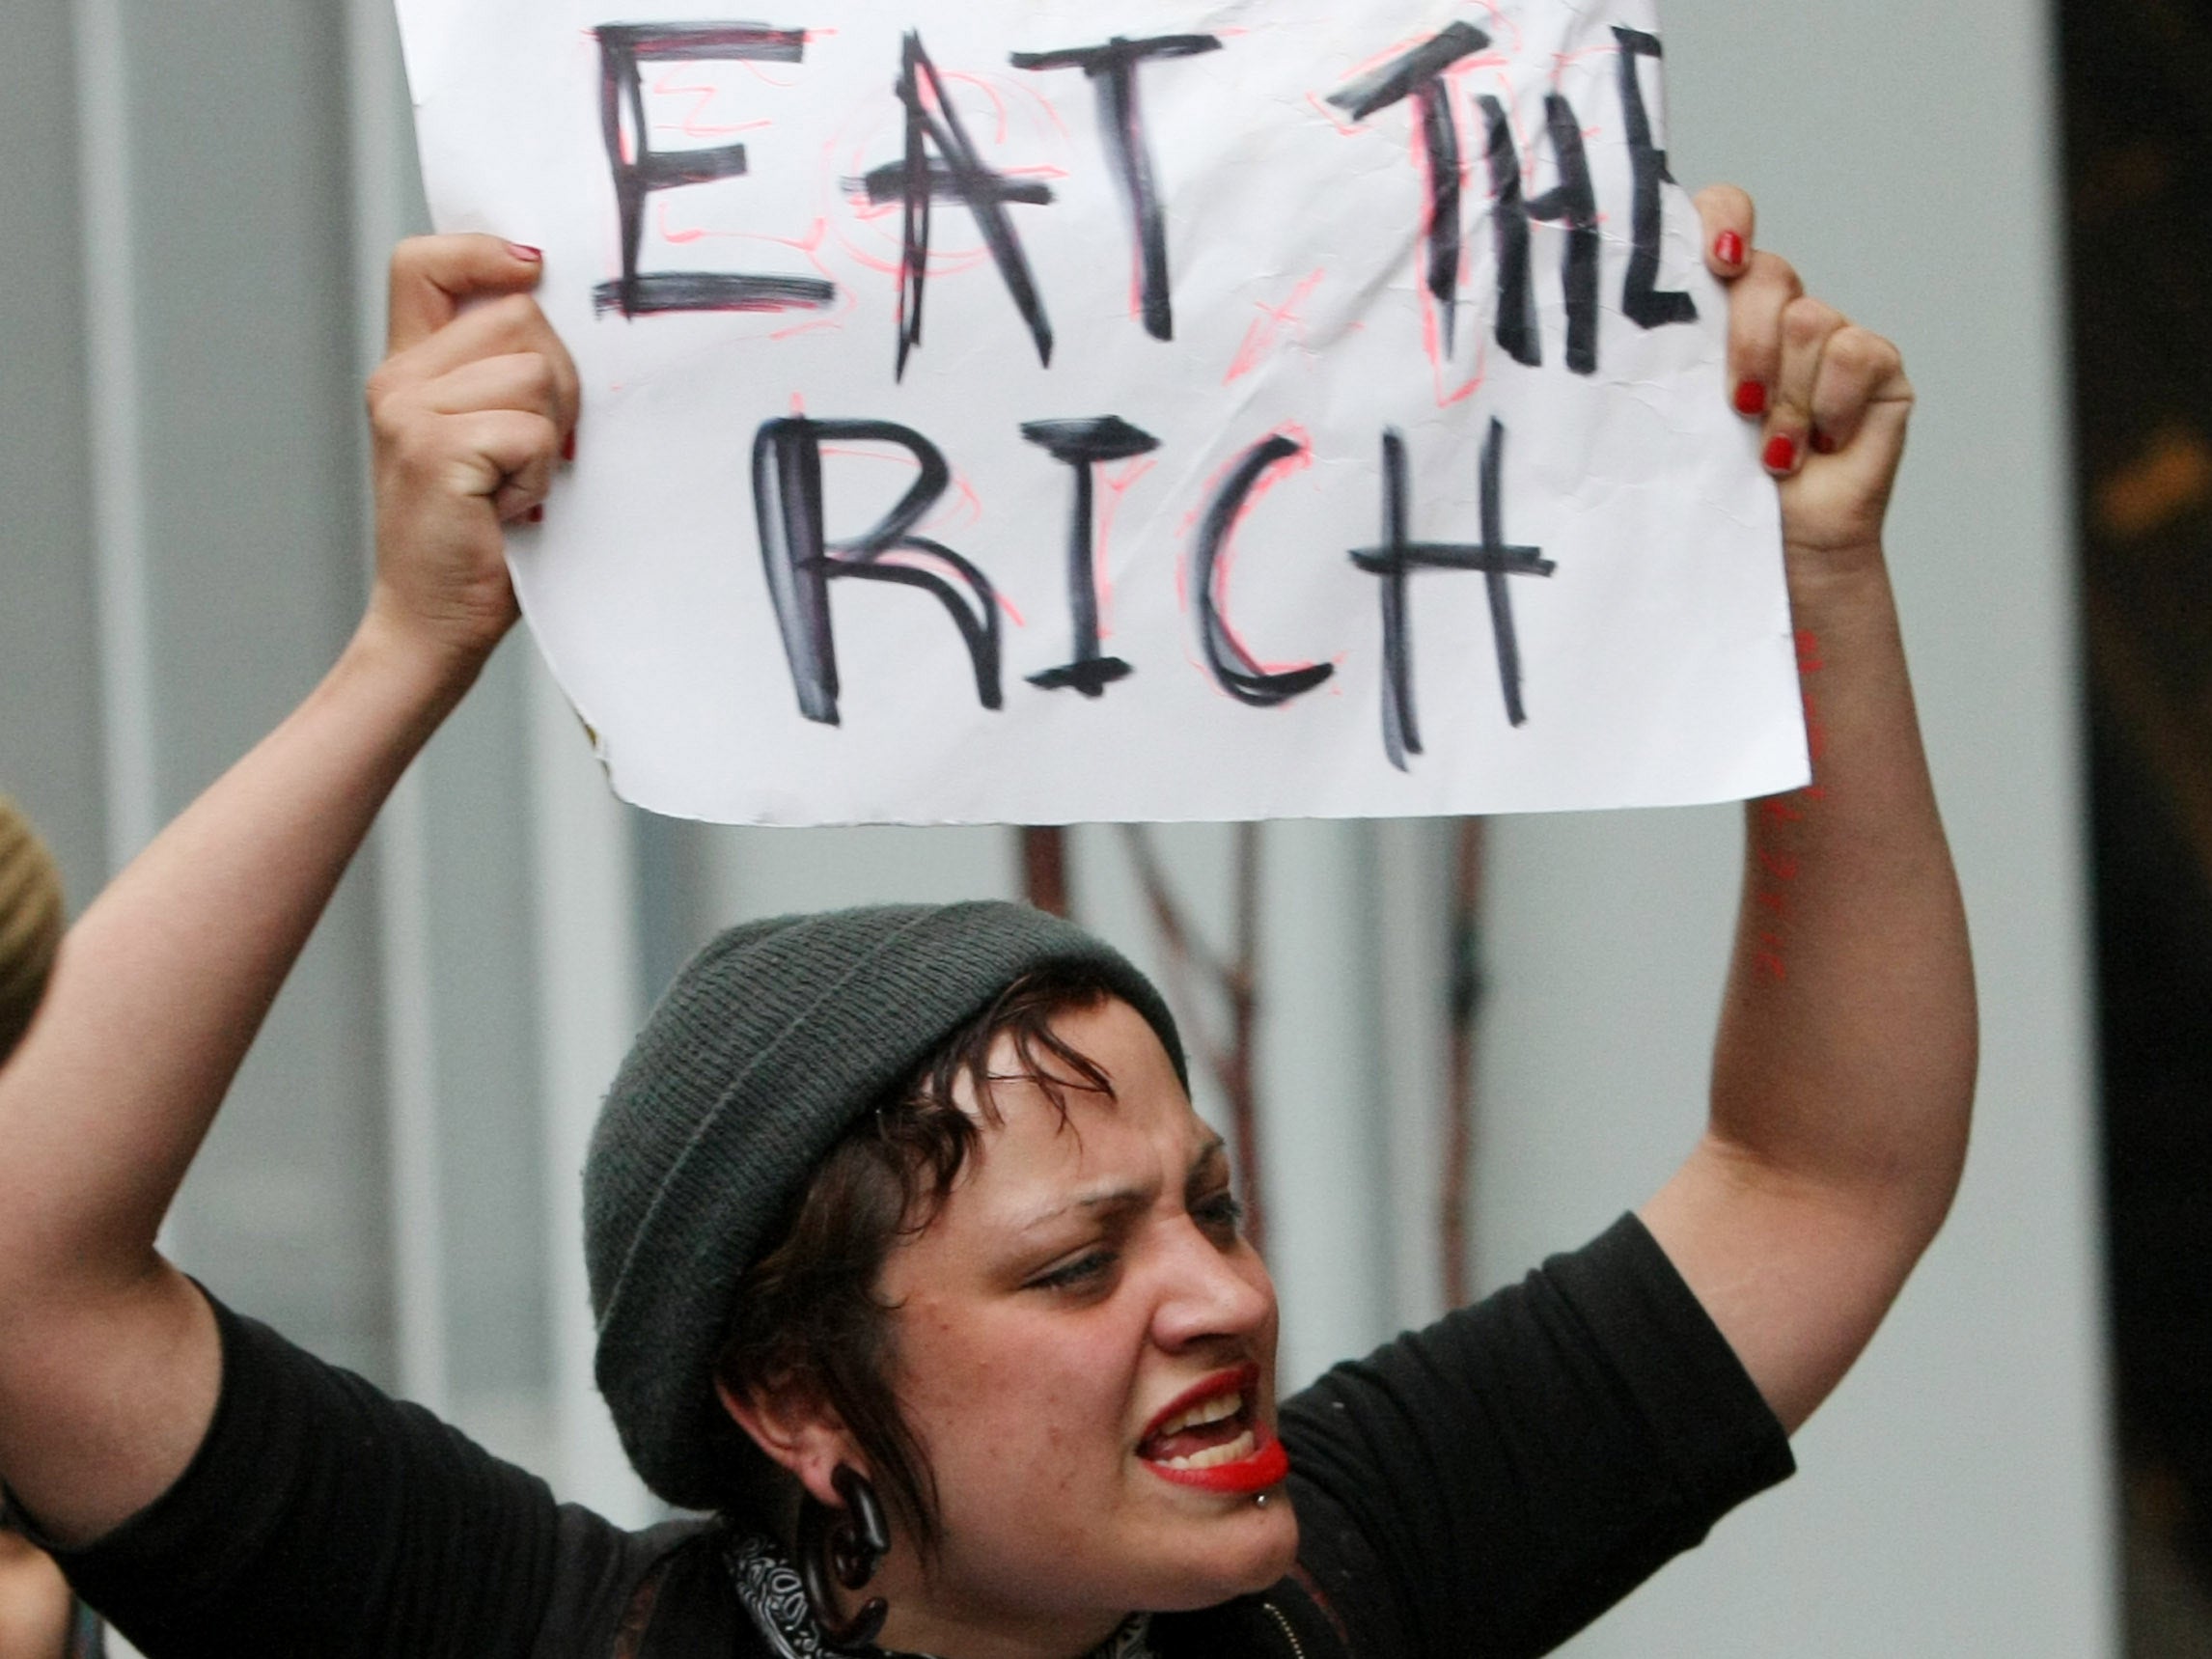 The issue of wealth disparity has been highlighted by the Occupy Movement